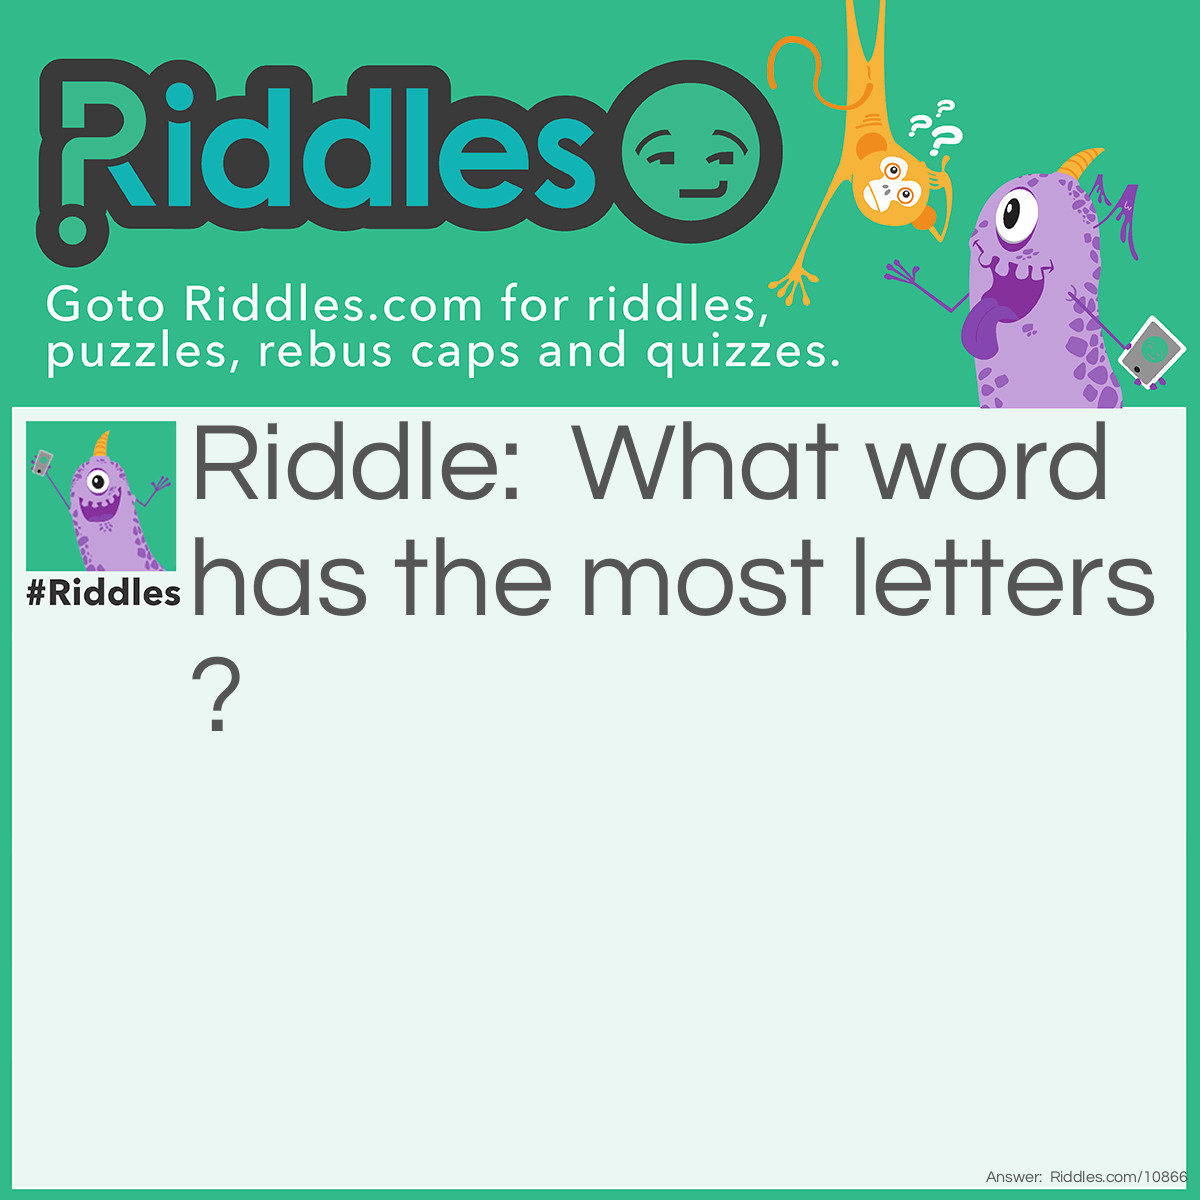 Riddle: What word has the most letters? Answer: The post office.